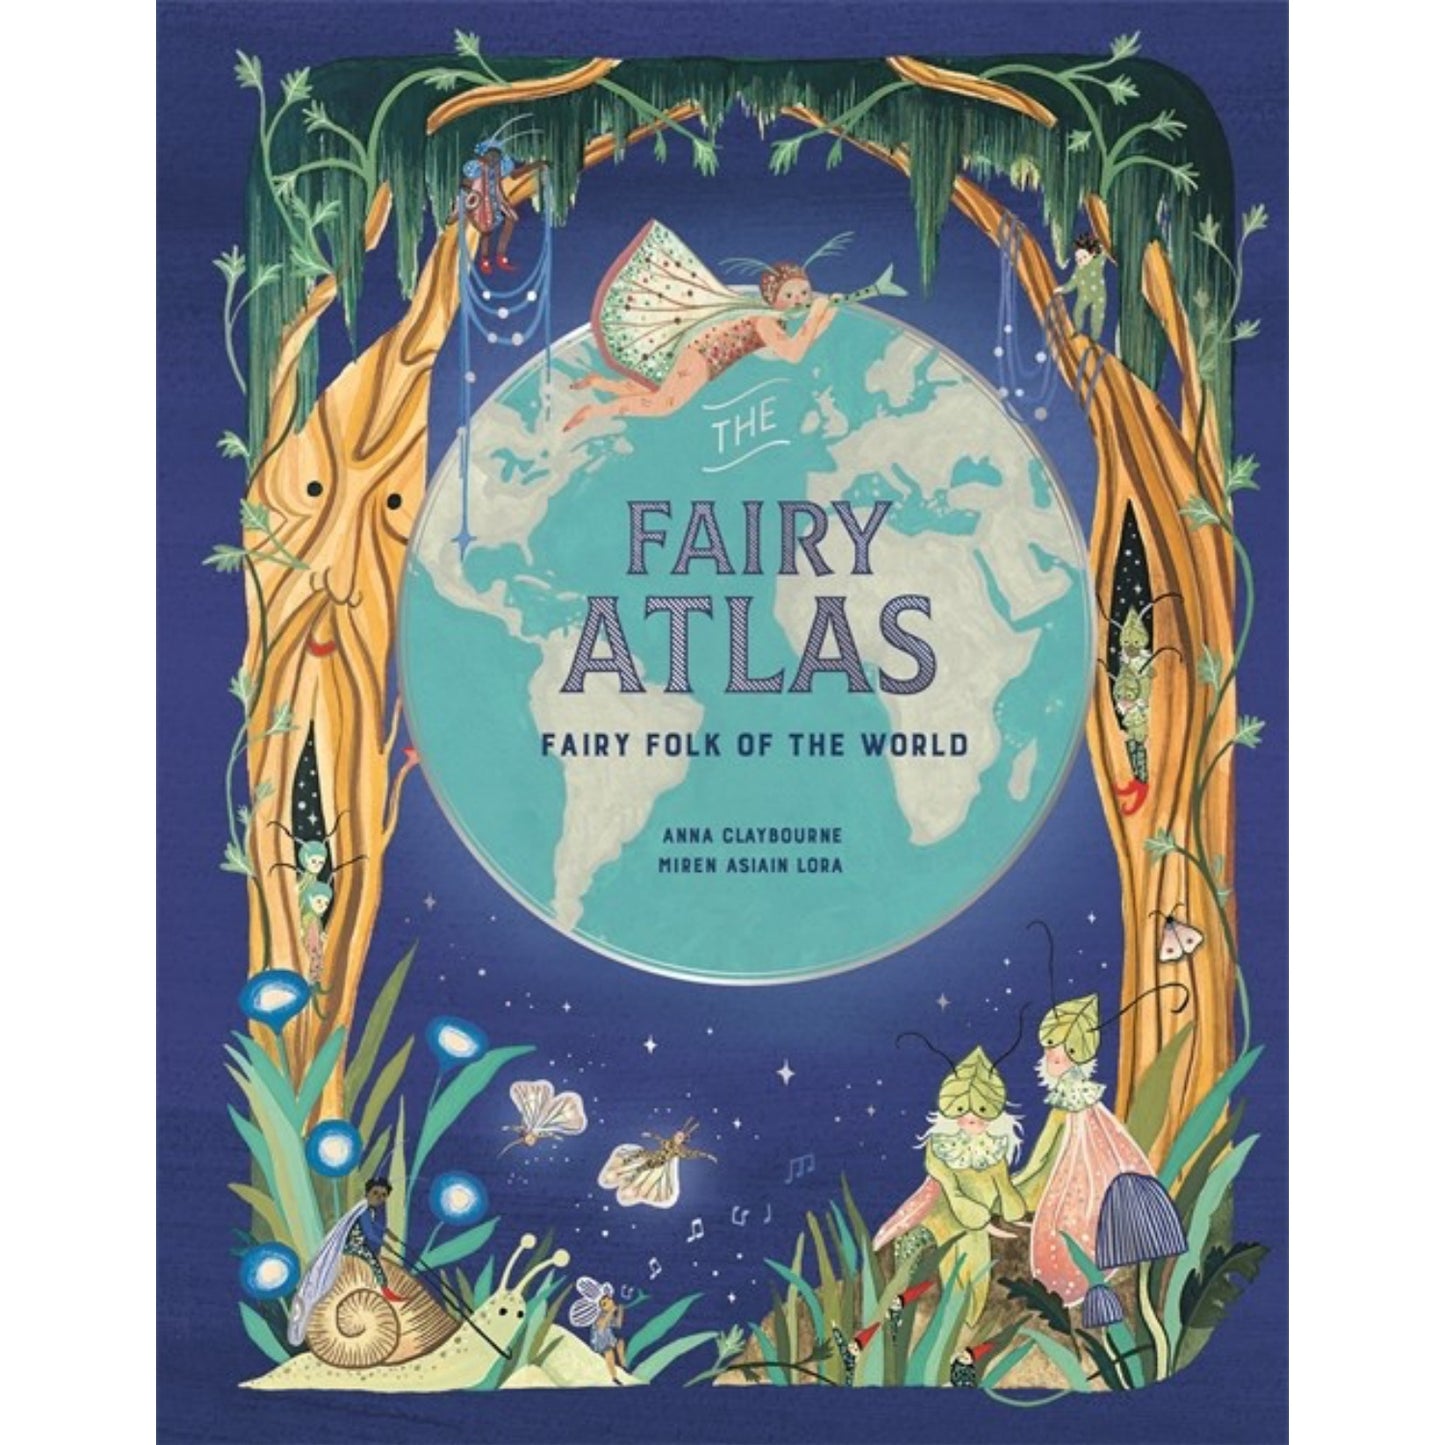 The Fairy Atlas: Fairy Folk of the World | Children's Books on Tales and Stories